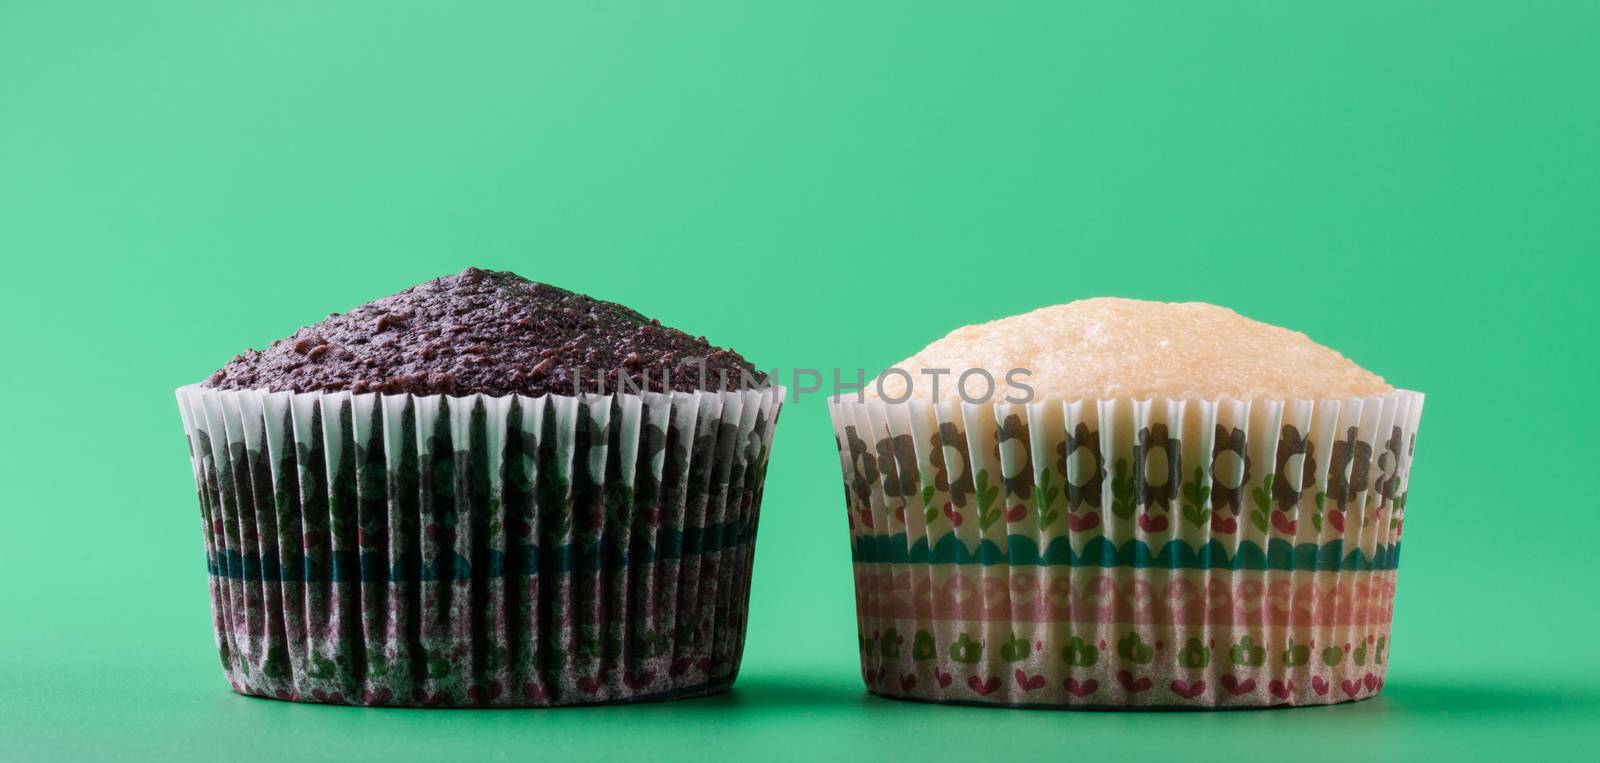 Delicious sweet vanilla and chocolate cupcake, green background